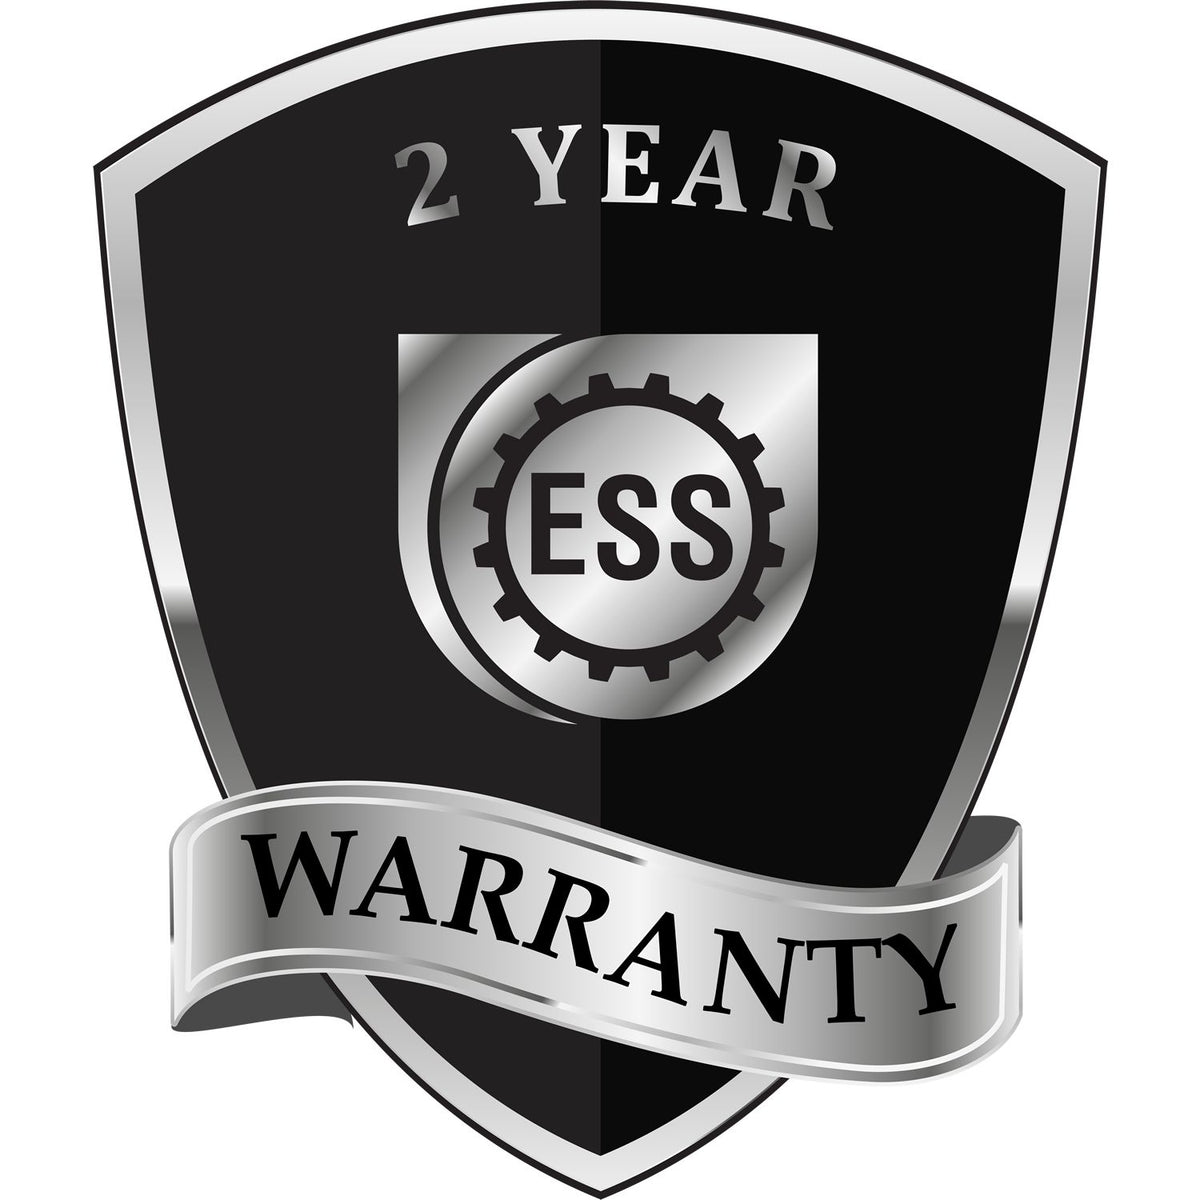 A black and silver badge or emblem showing warranty information for the Soft Indiana Professional Geologist Seal